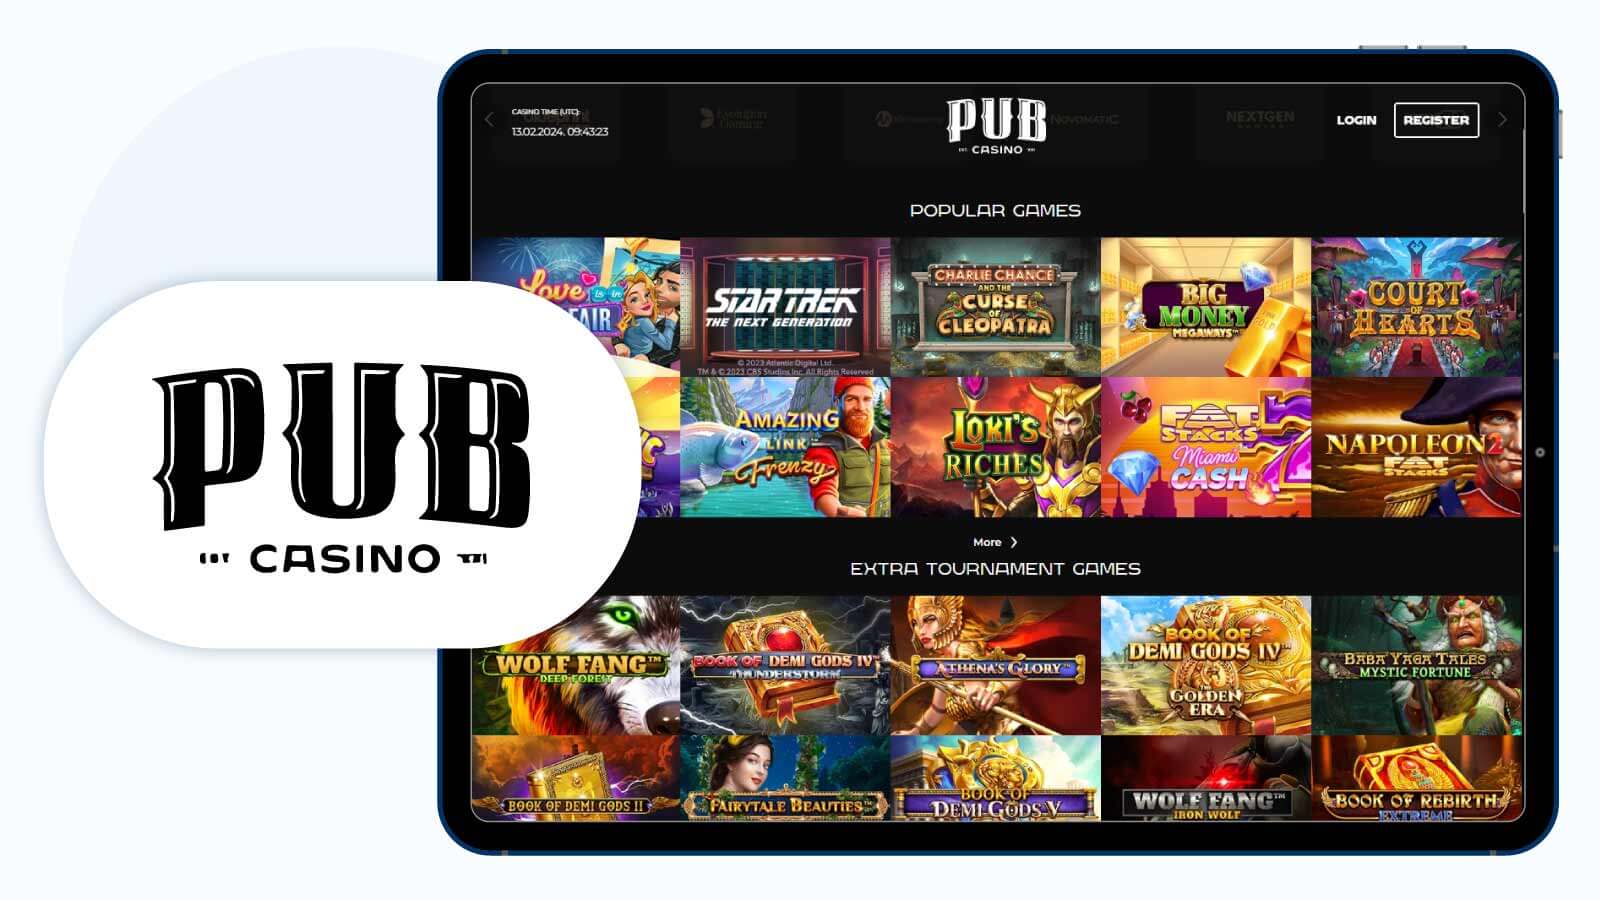 Pub Casino – Top New L&L Europe Limited Online Casino in Our Database